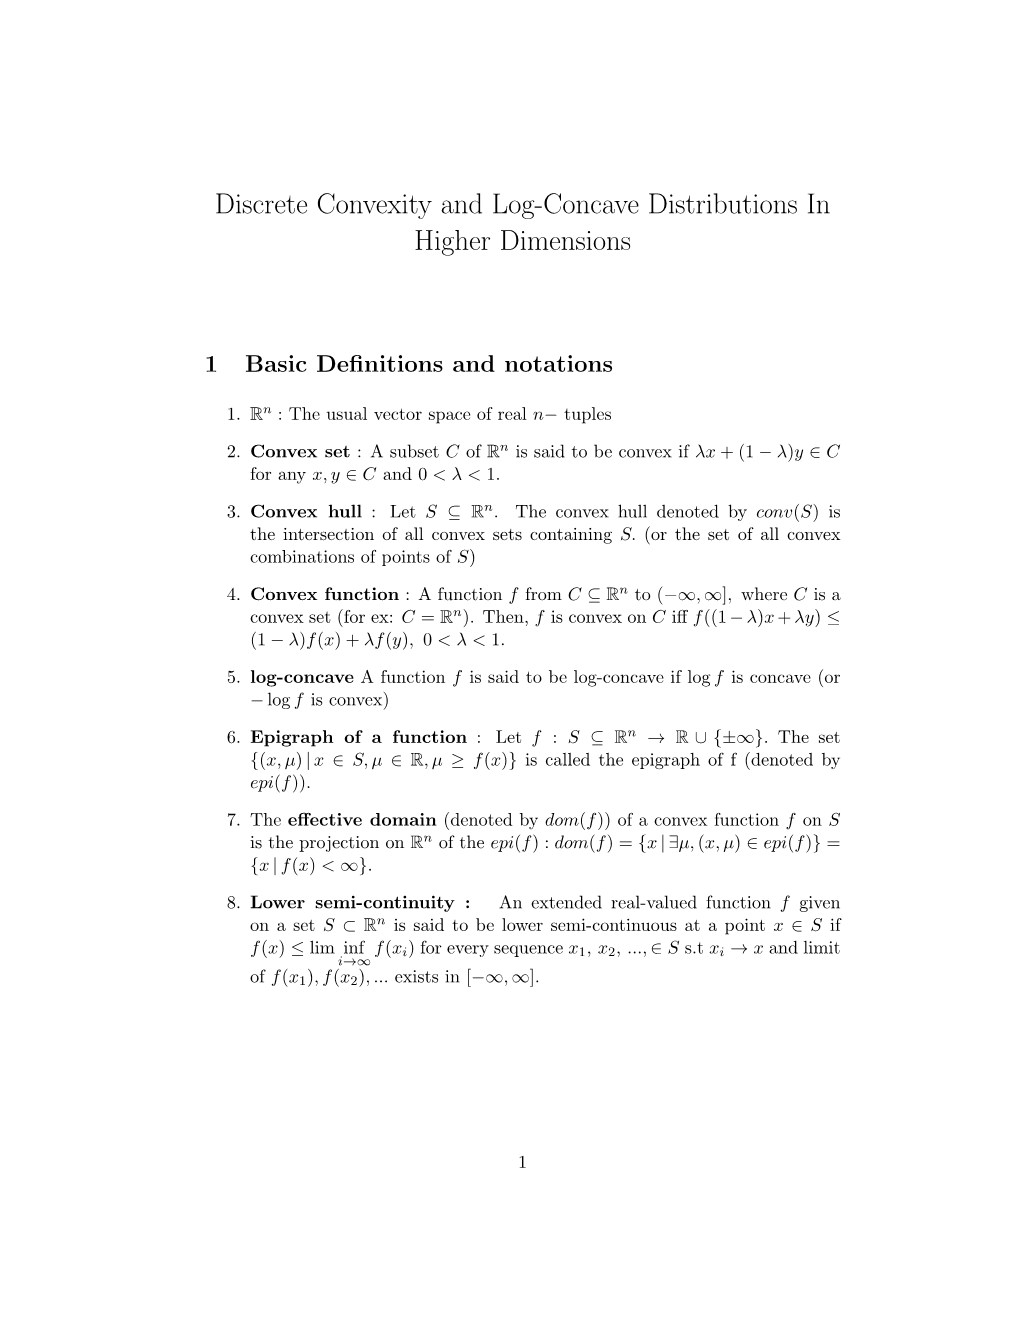 Discrete Convexity and Log-Concave Distributions in Higher Dimensions